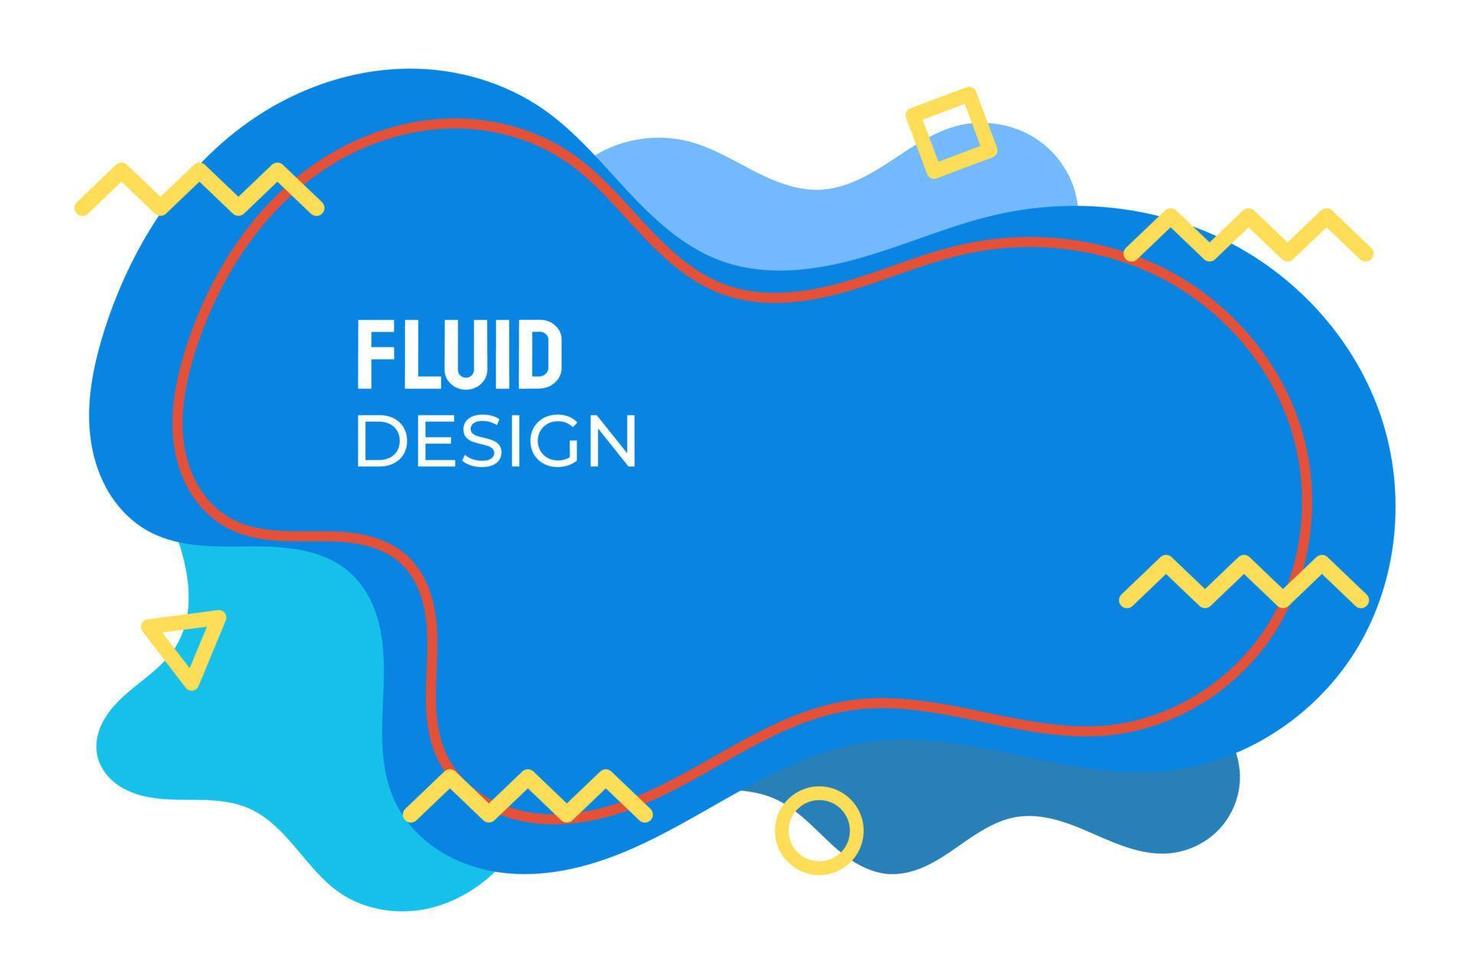 Fluid design in blue color in the middle with zigzag lines vector